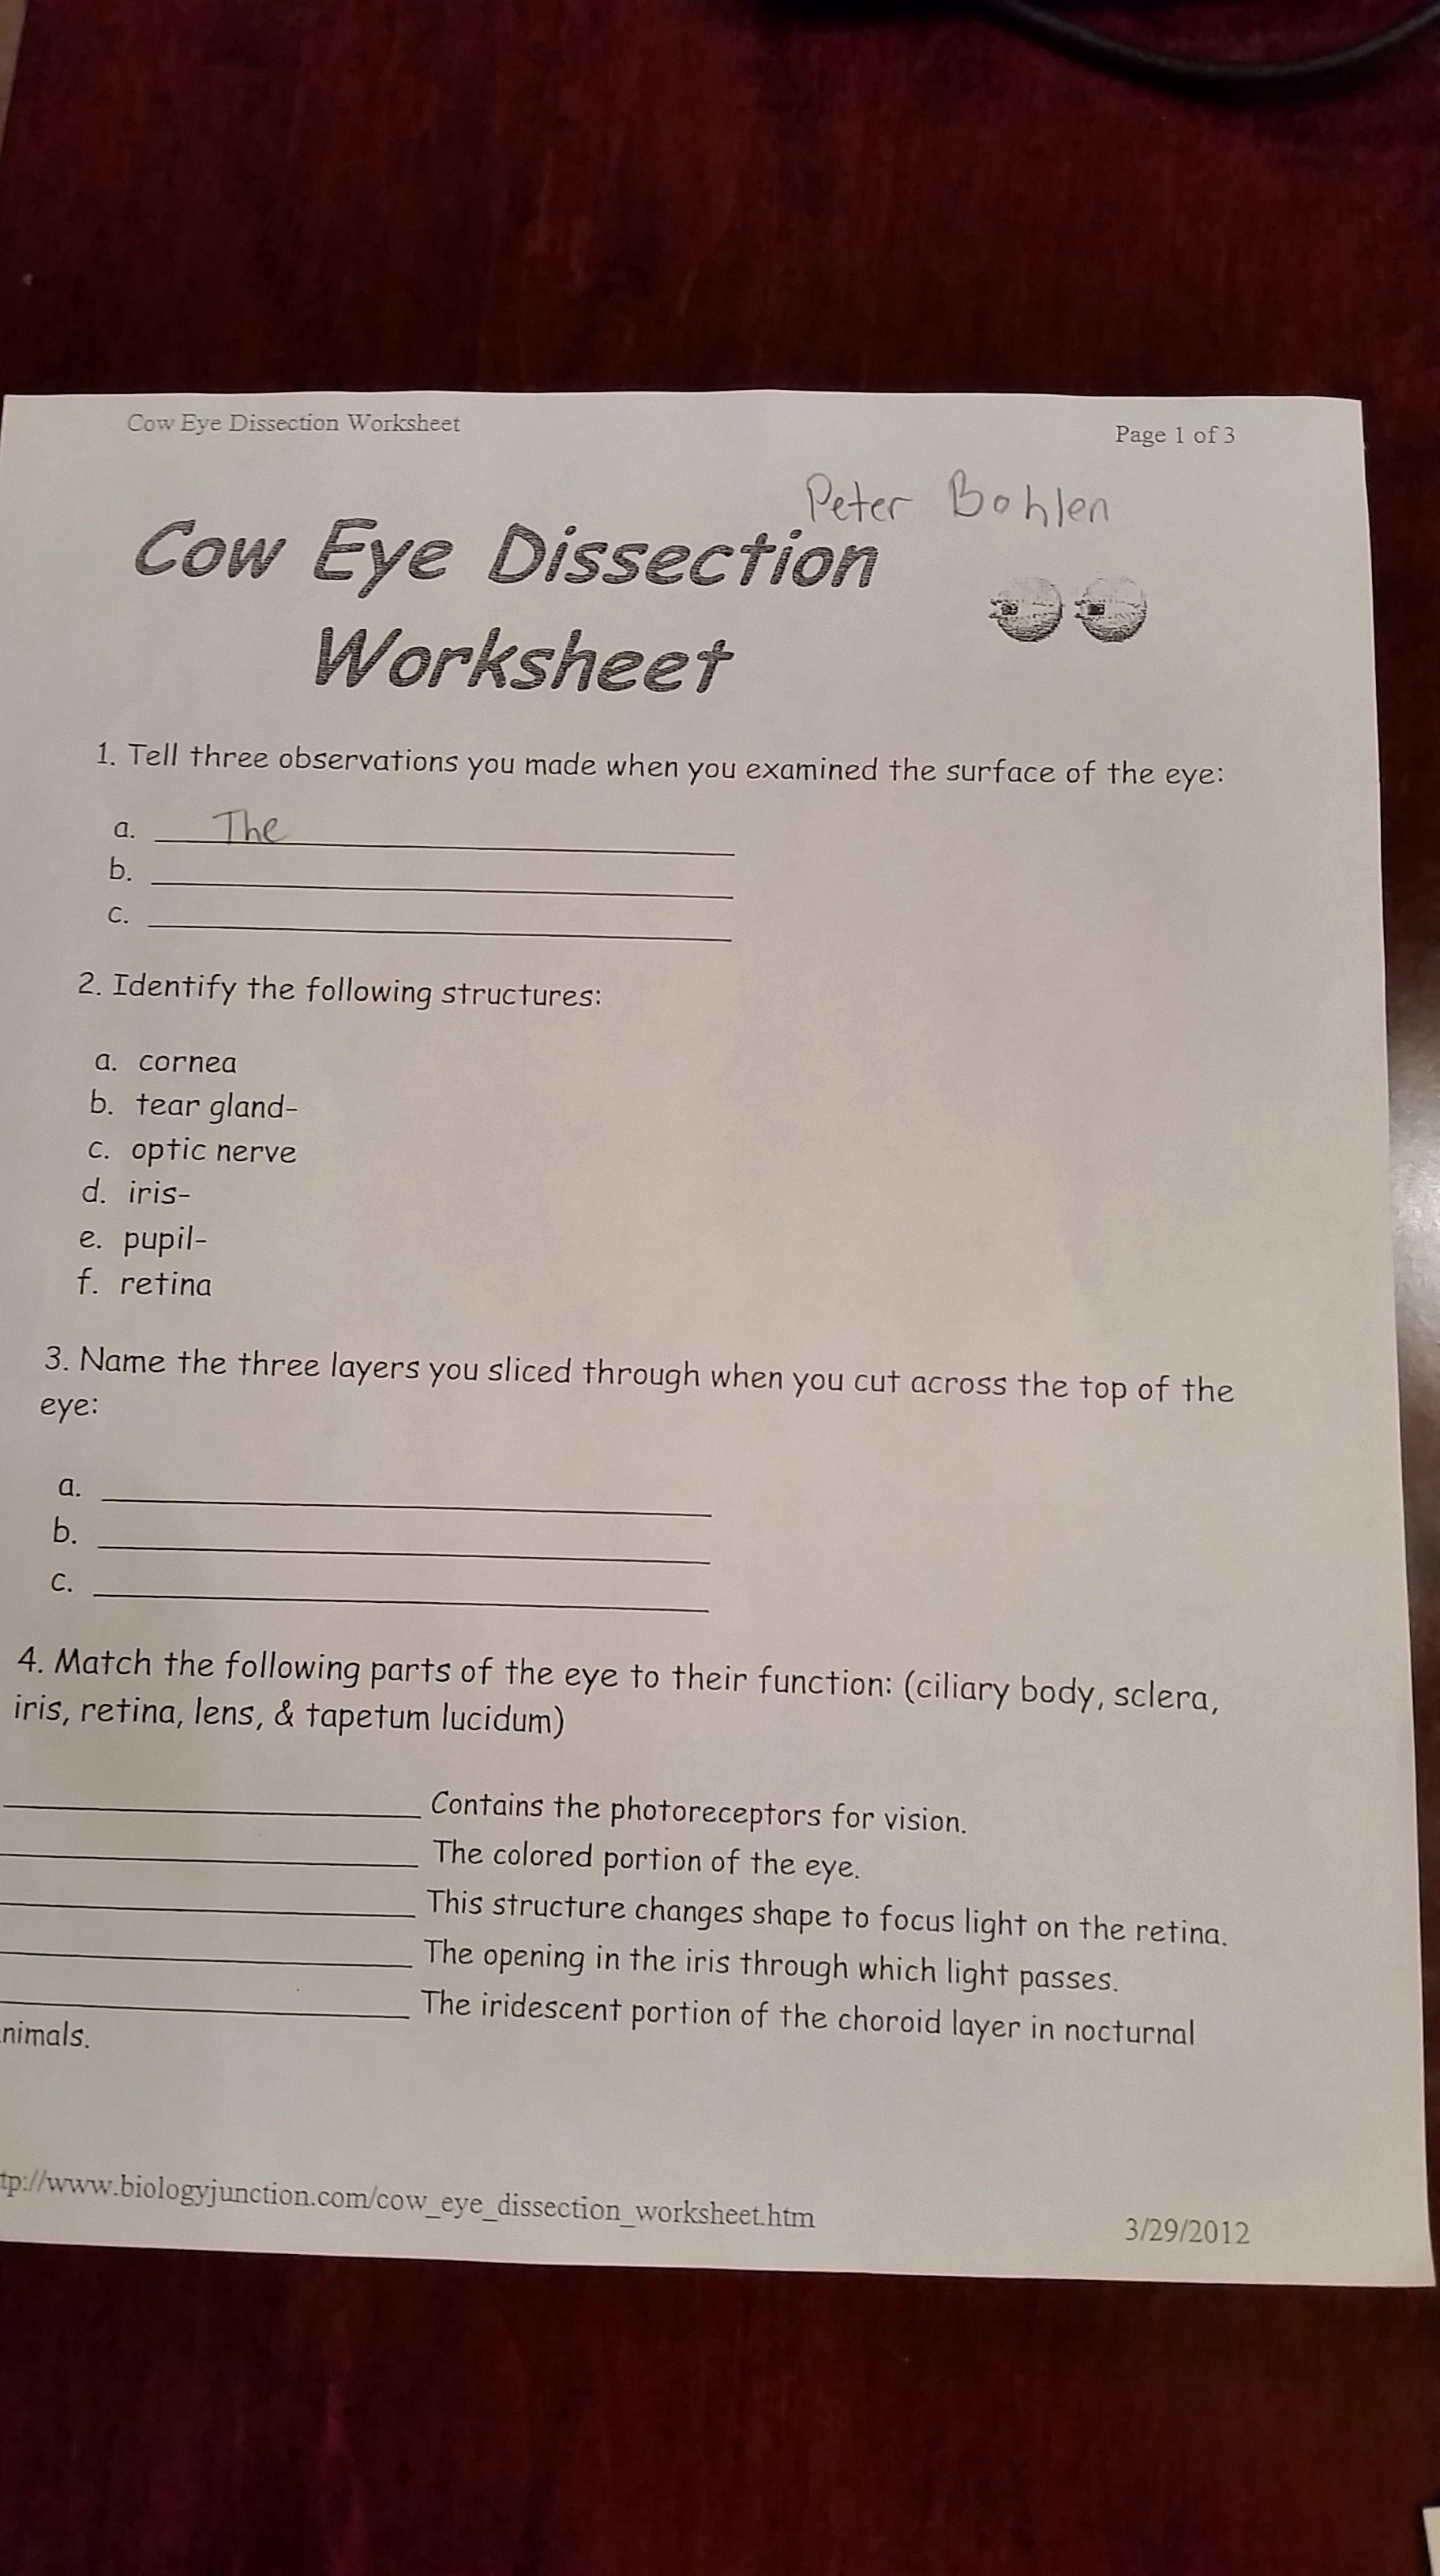 Sheep Brain Dissection Worksheet Awesome Sheep Brain Dissection Analysis Worksheet Answers